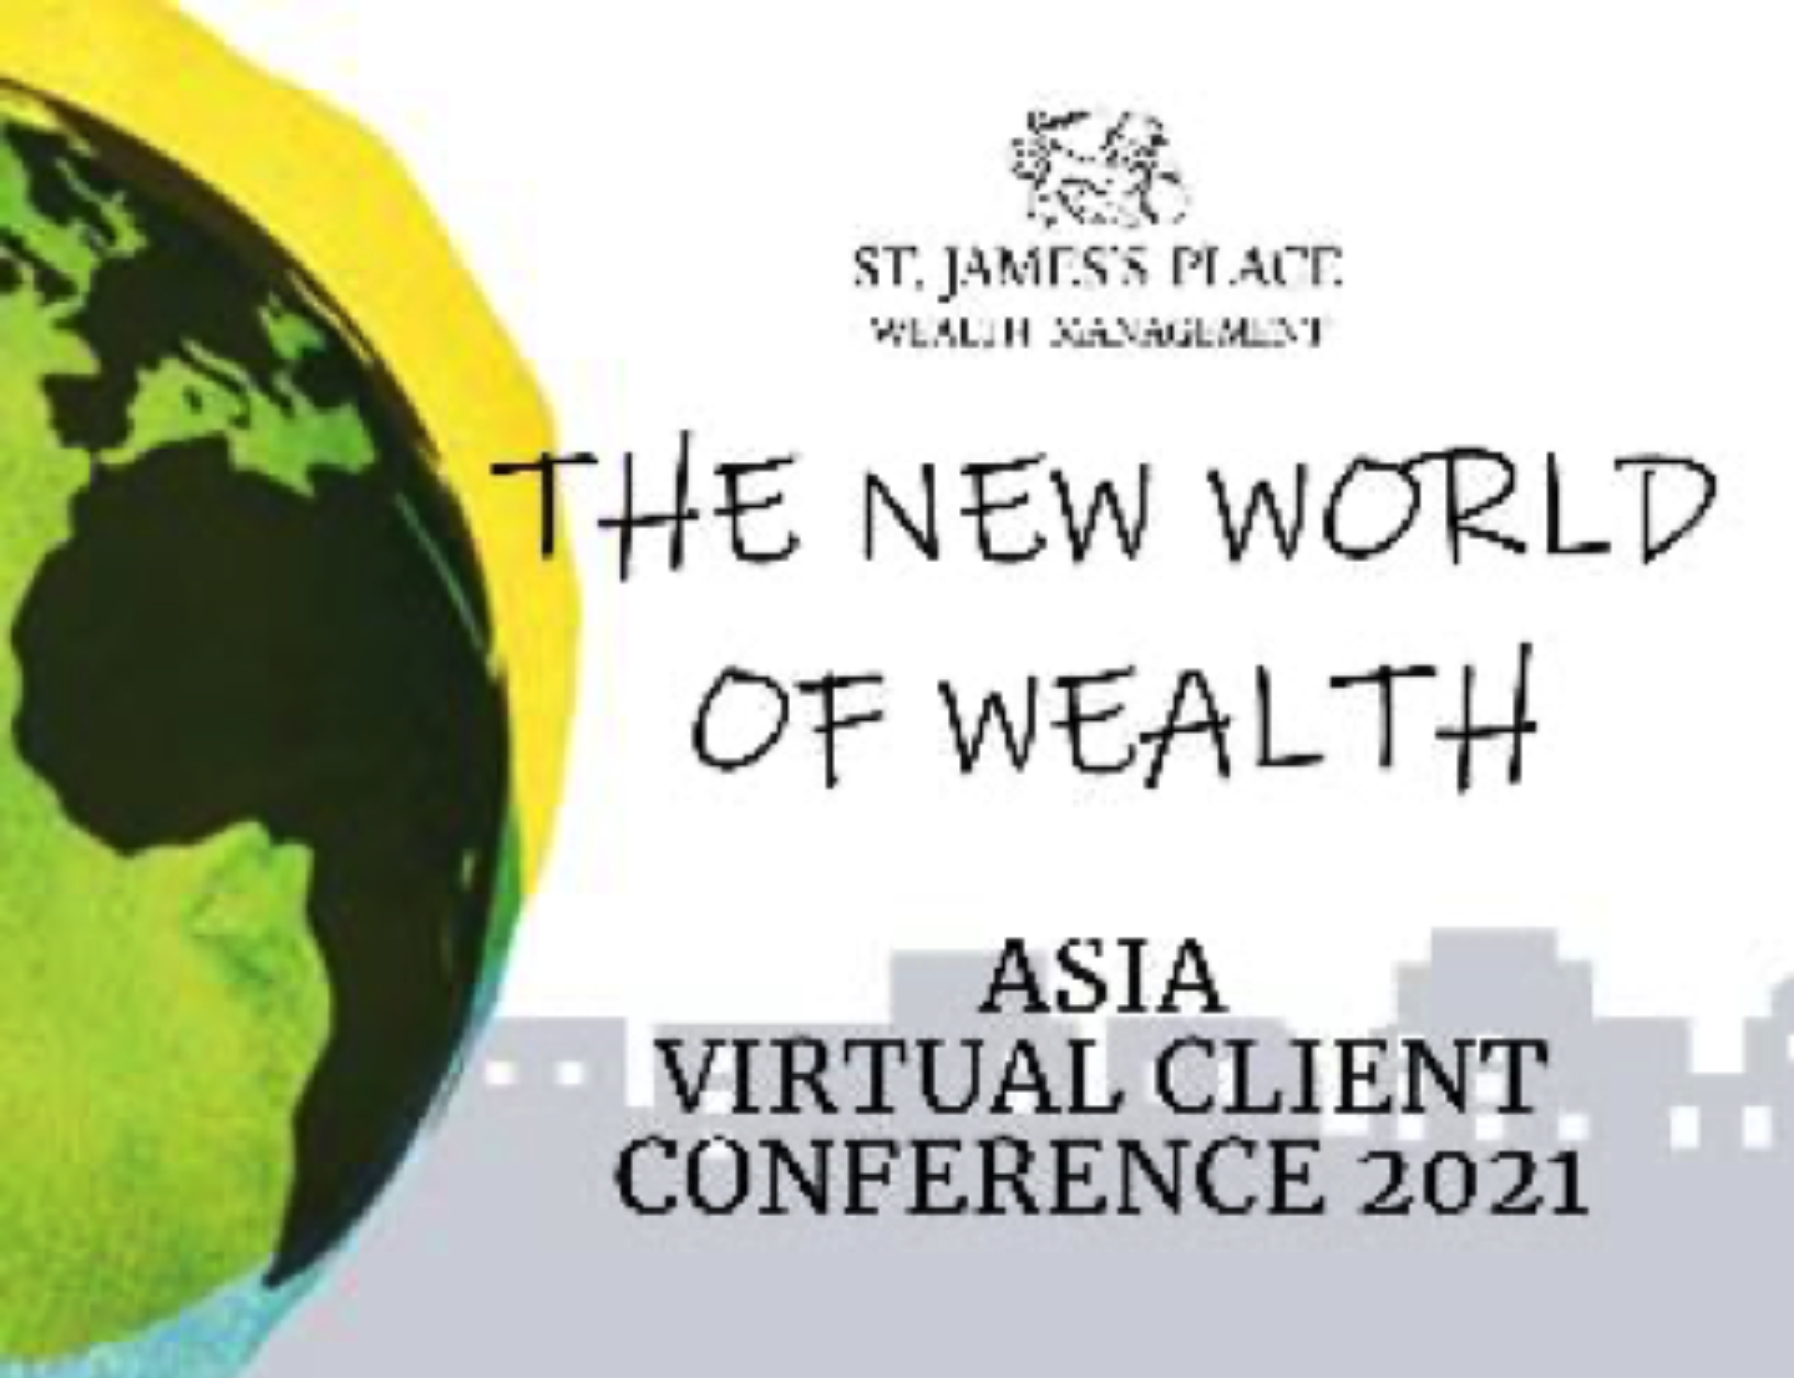 St. James’s Place Asia Virtual Client Conference 2021: The New World of Wealth